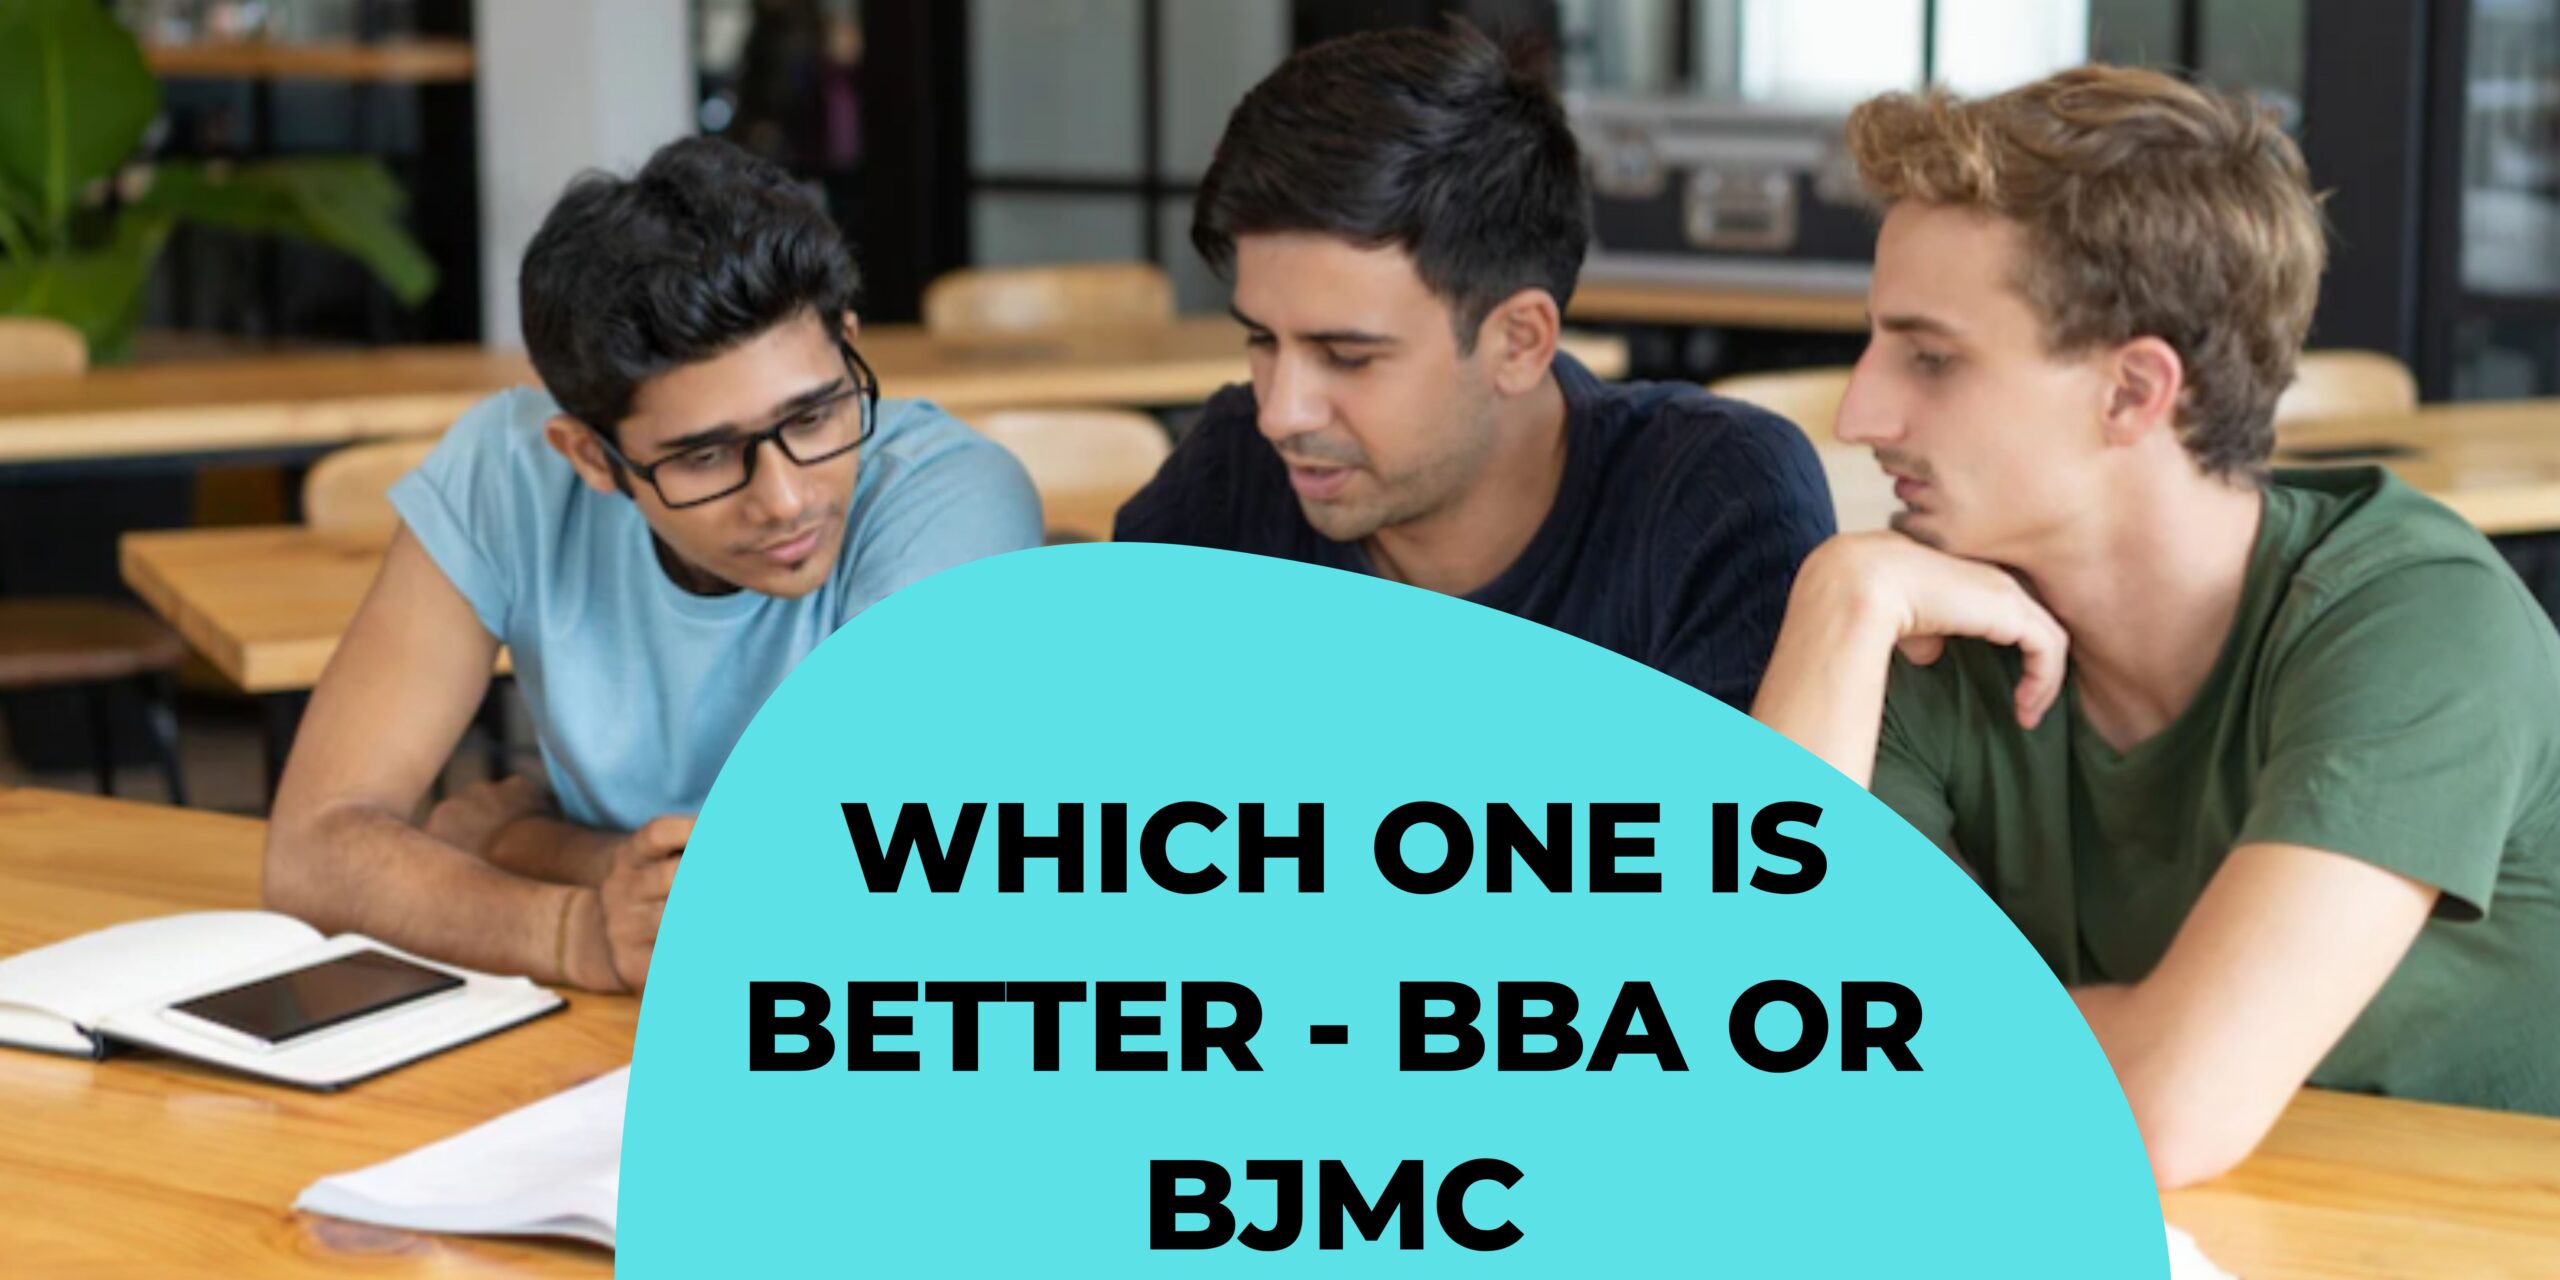 Which one is better BBA or BJMC